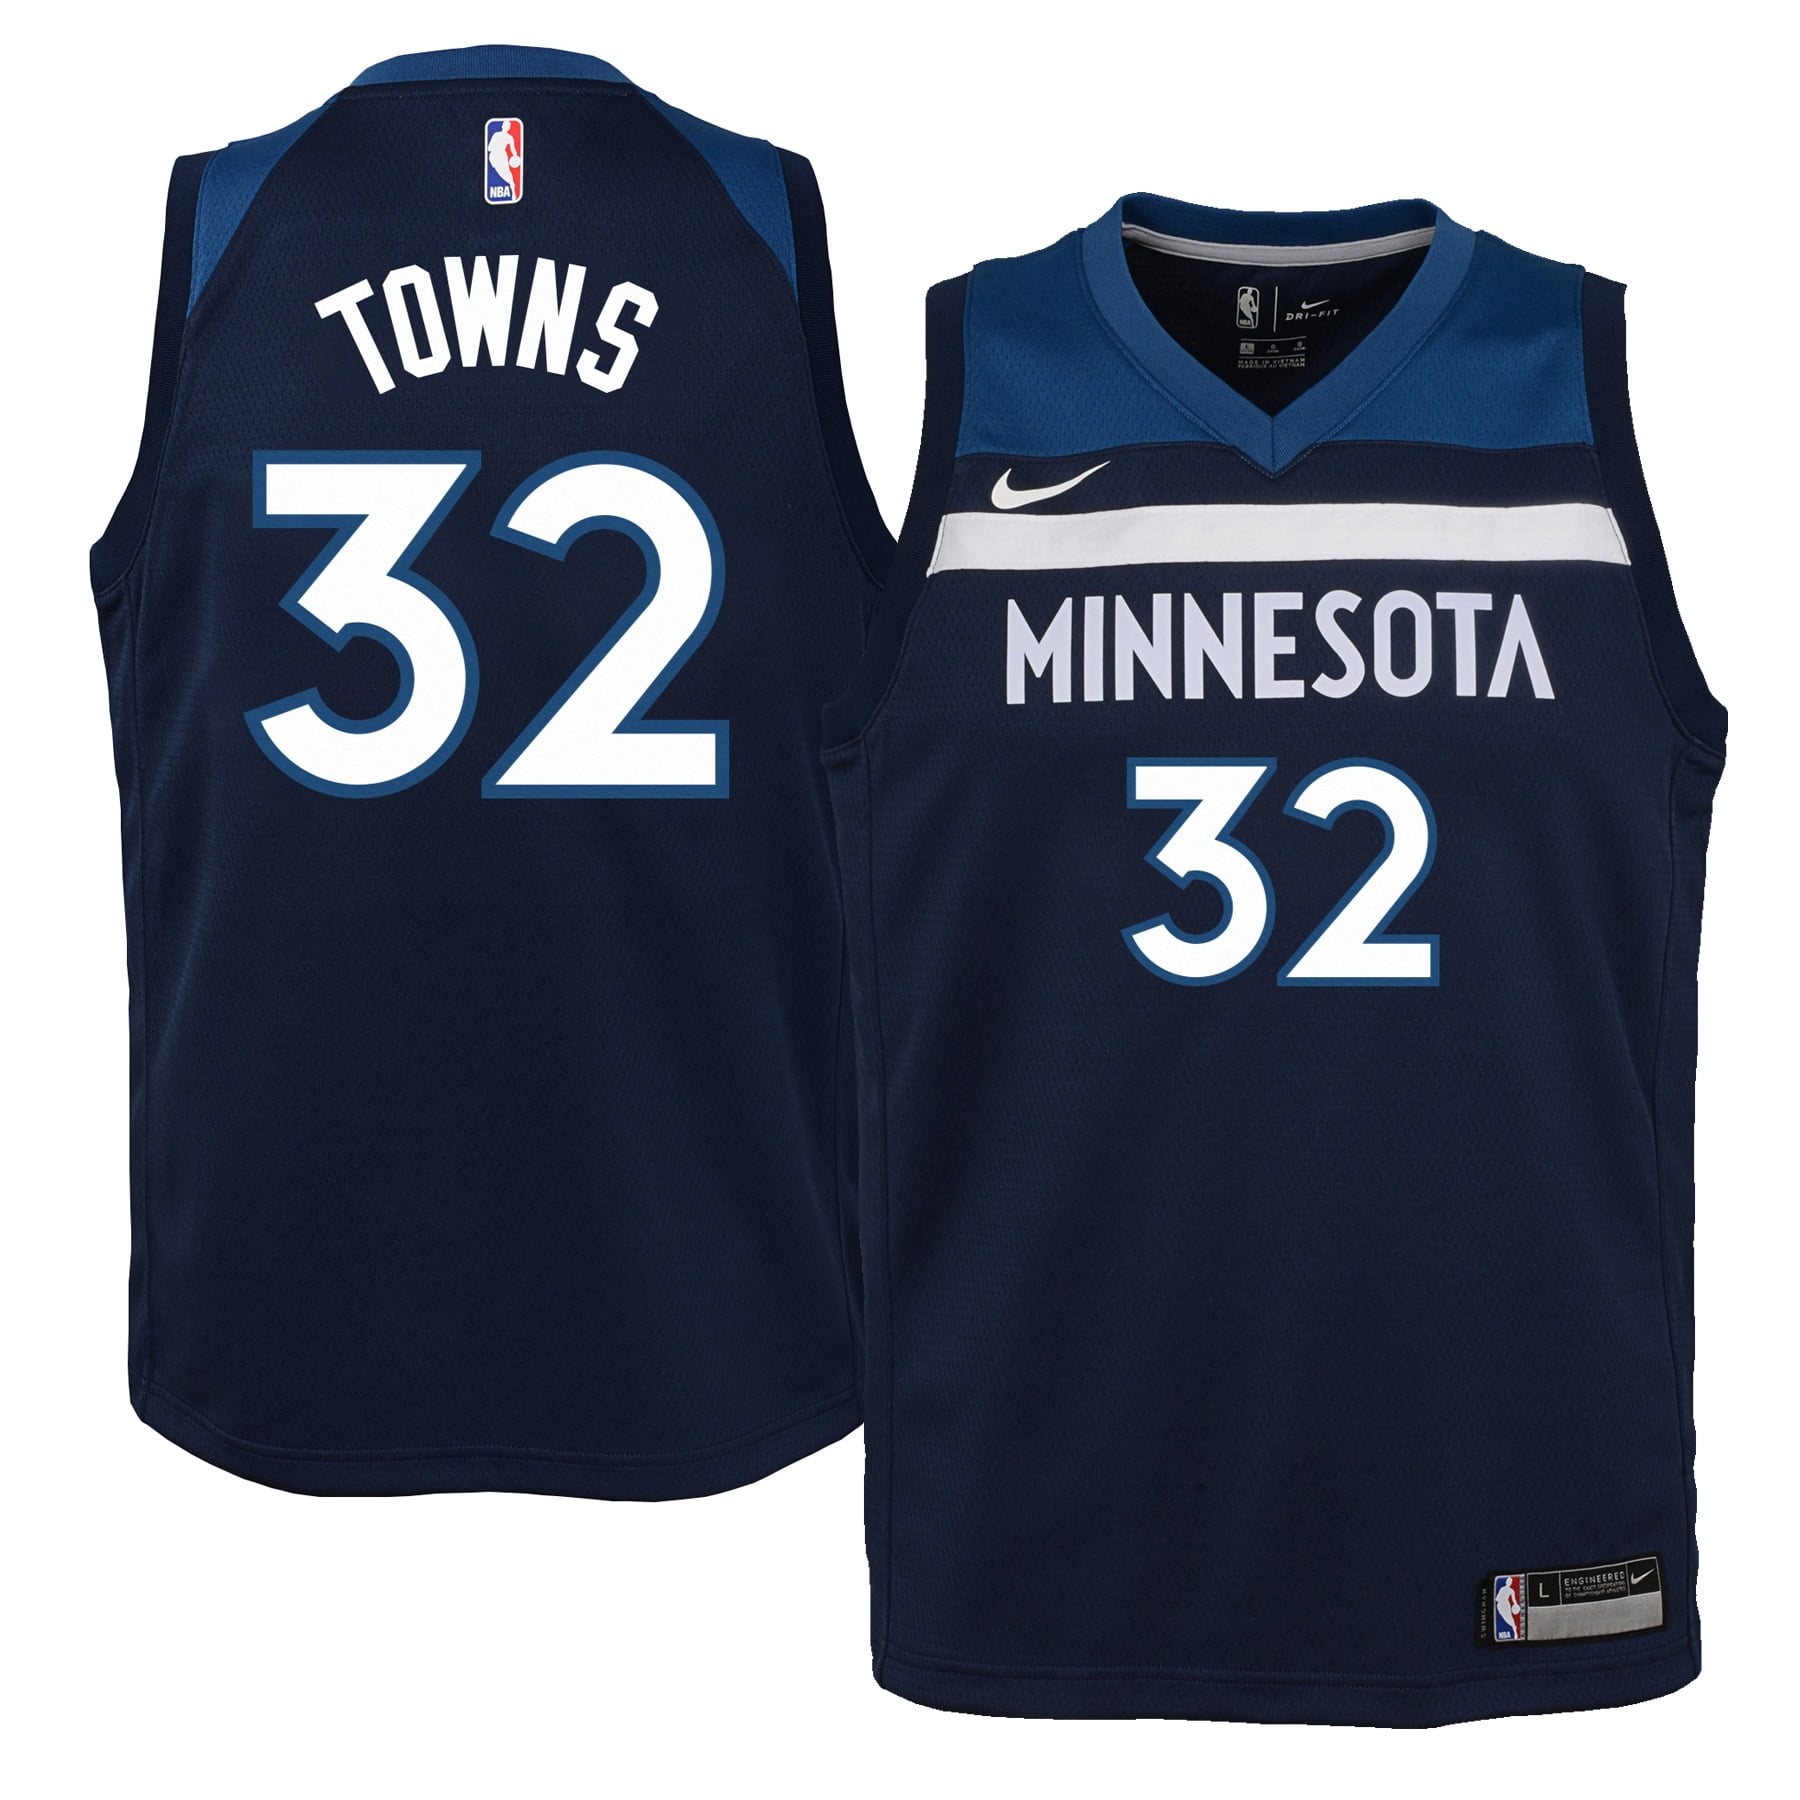 karl anthony towns prince jersey